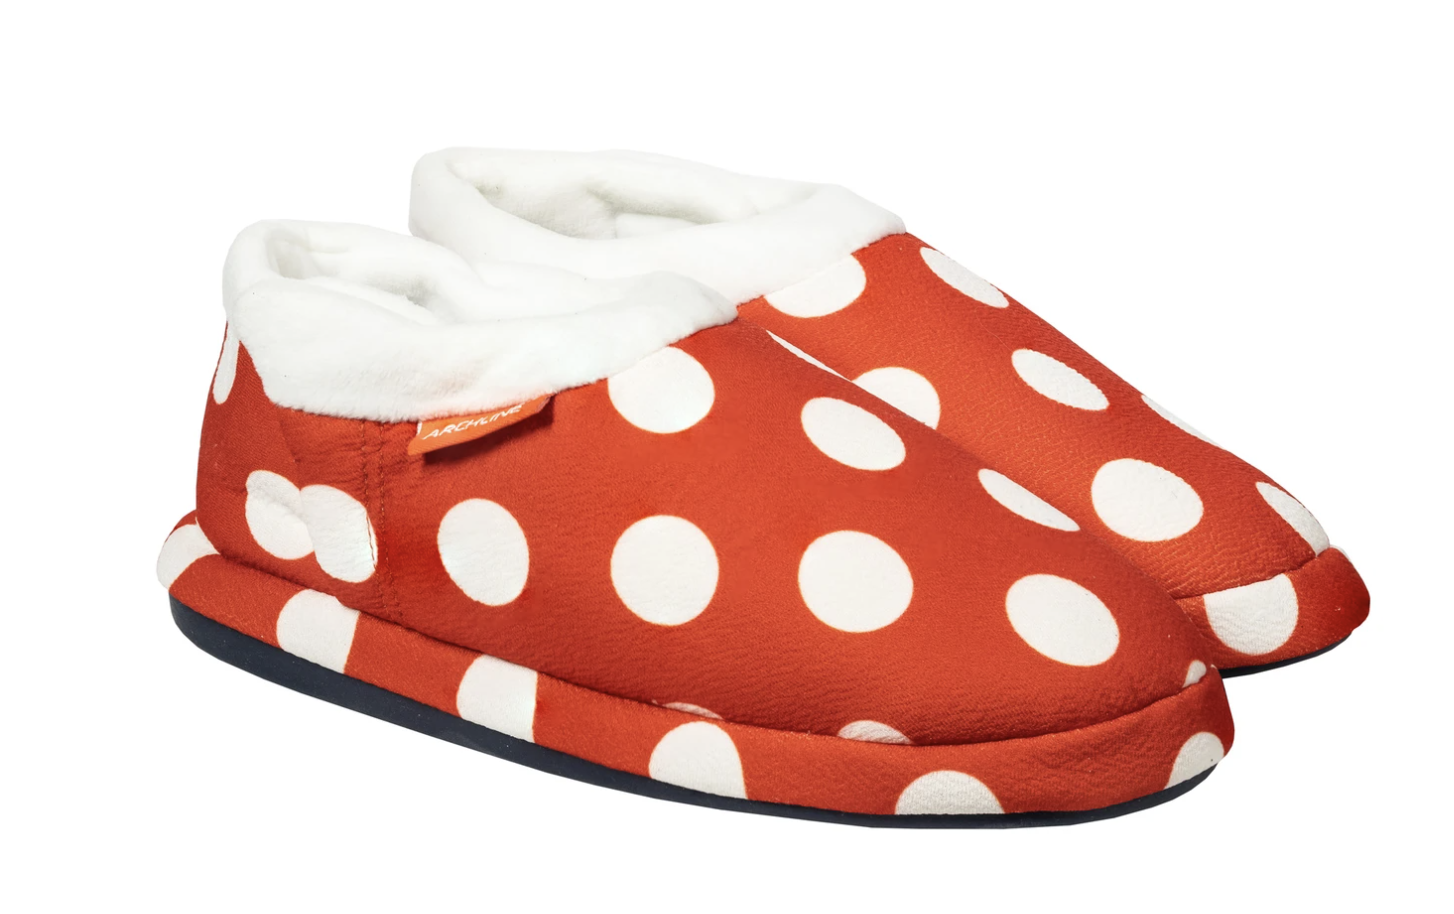 Orthotic Slippers CLOSED Back Scuffs Moccasins Pain Relief - Red Polka Dots - EUR 42 (Womens 11 US)